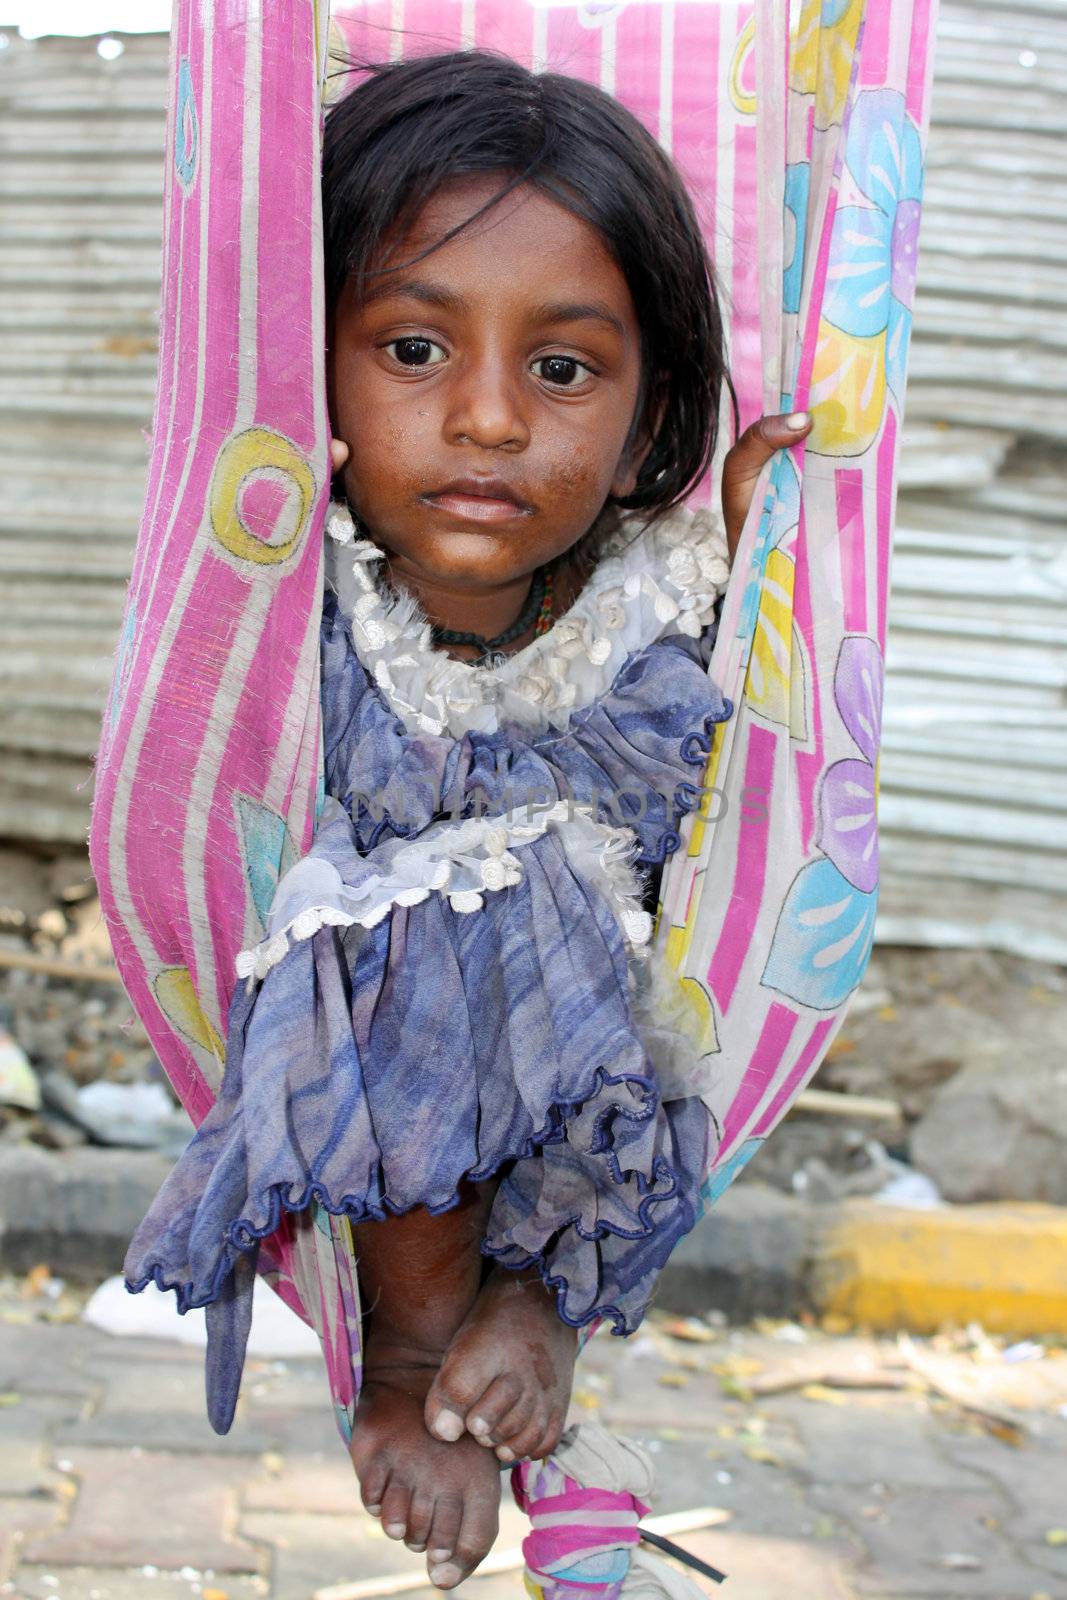 The very poor sick Indian girl sitting in a swing made of an old sari (traditional women clothes), lost in her thoughts.